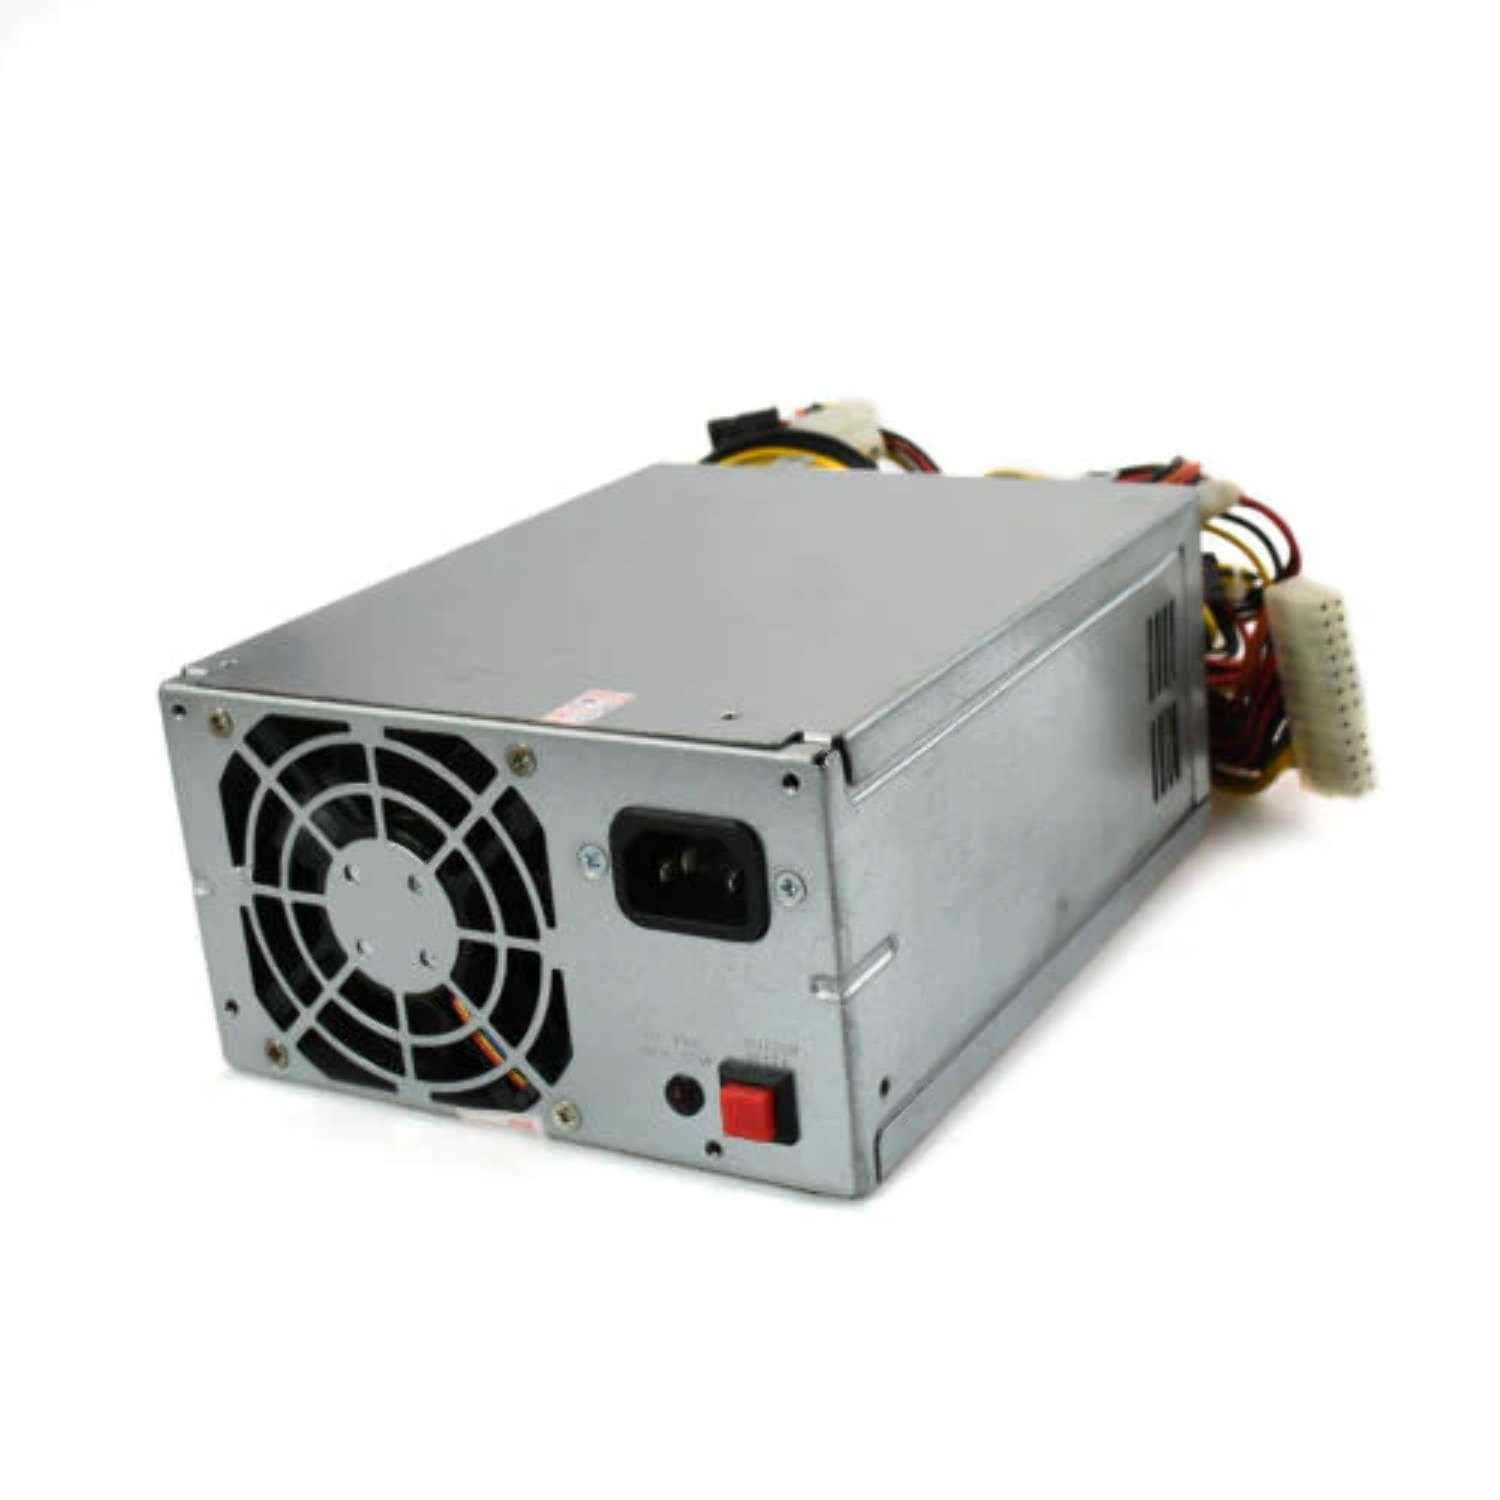 For SuperMicro PWS-865-PQ 865W Power Supply for Tower Workstation Fonte - image 2 of 11